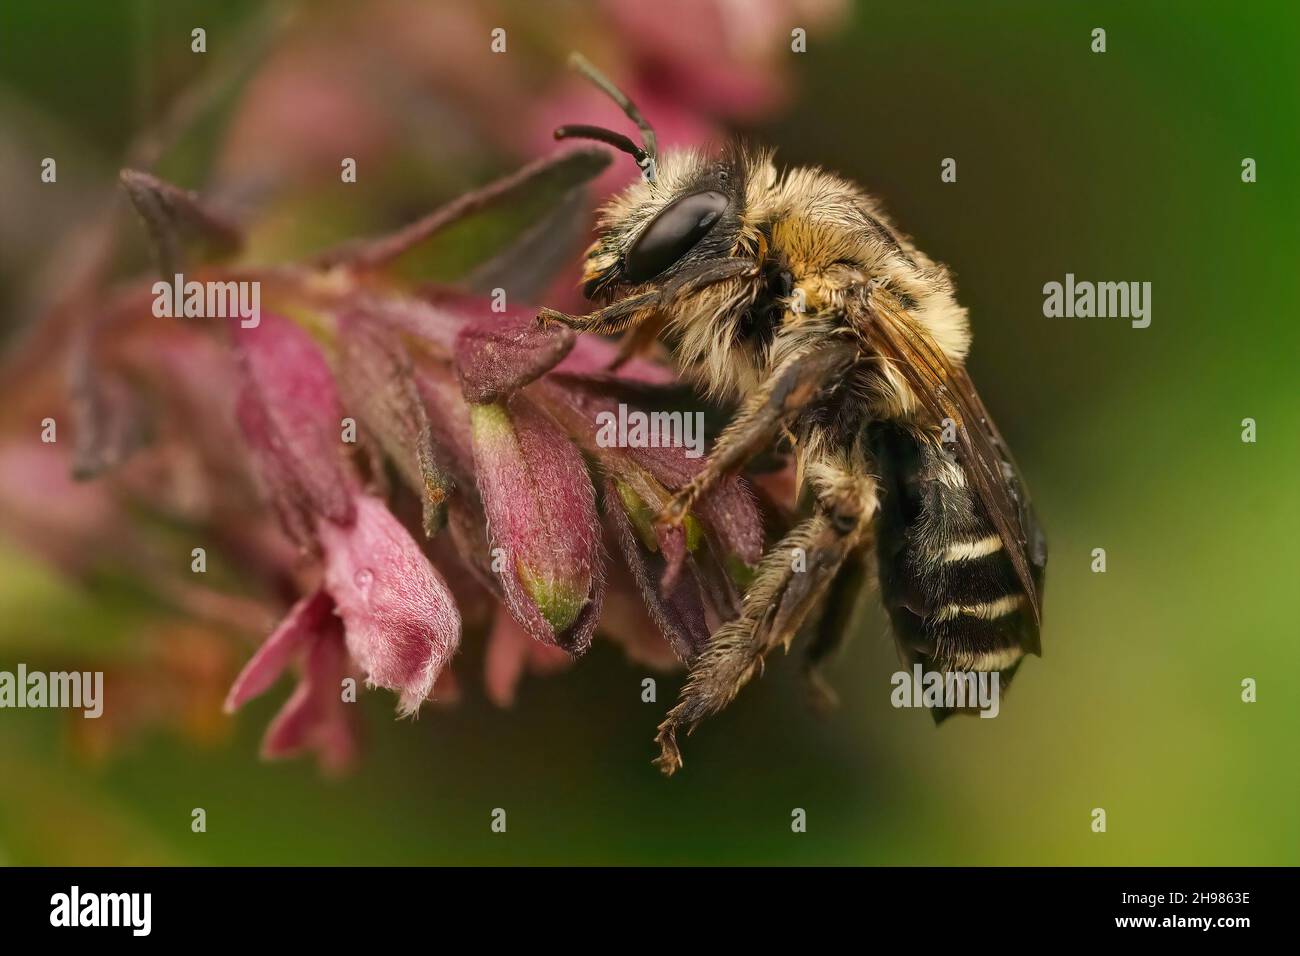 Closeup of a female of the specialist solitary Red bartsia bee, Melitta tricincta,  on the pink flower of it's host plan Odontites vernus Stock Photo